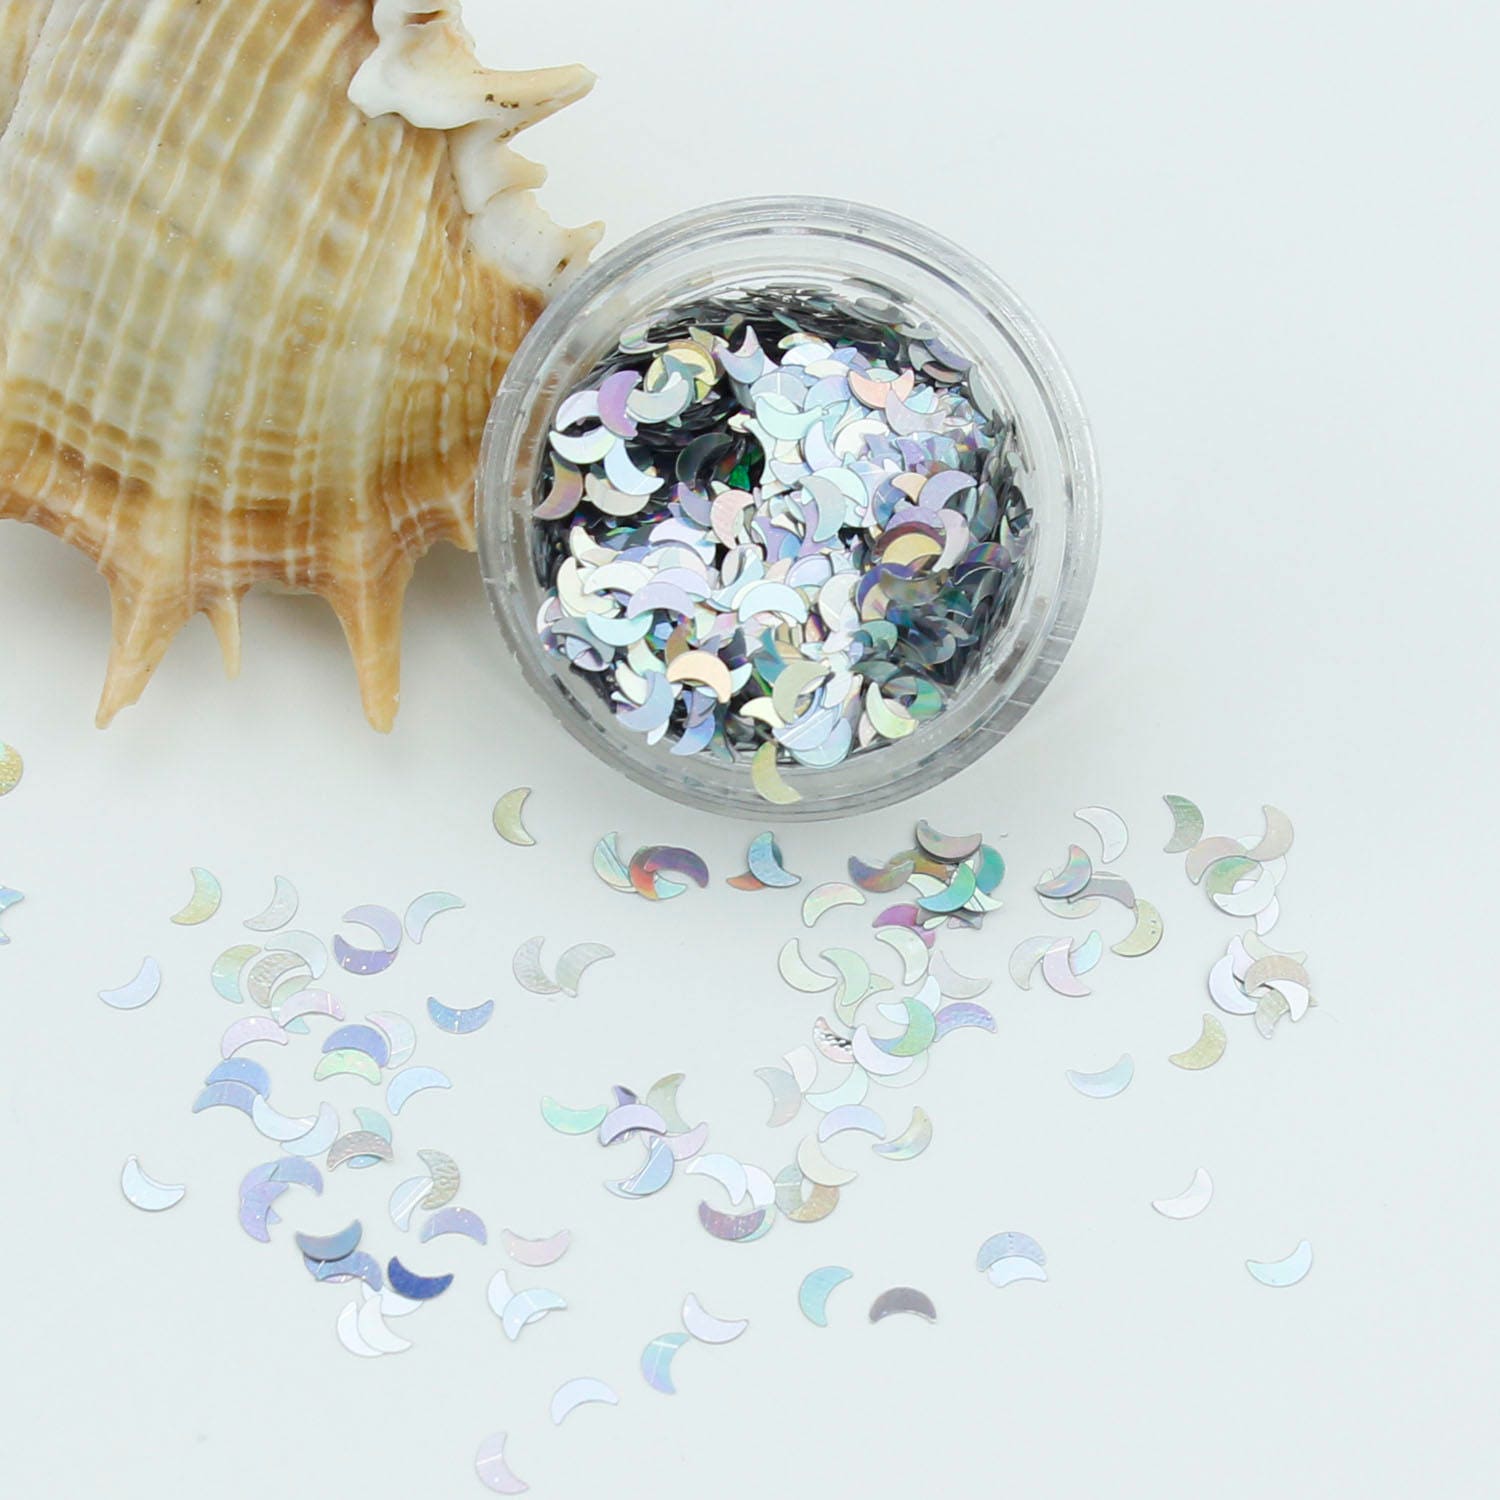 Holographic Star Biodegradable Glitter, Made in the USA, Non Toxic